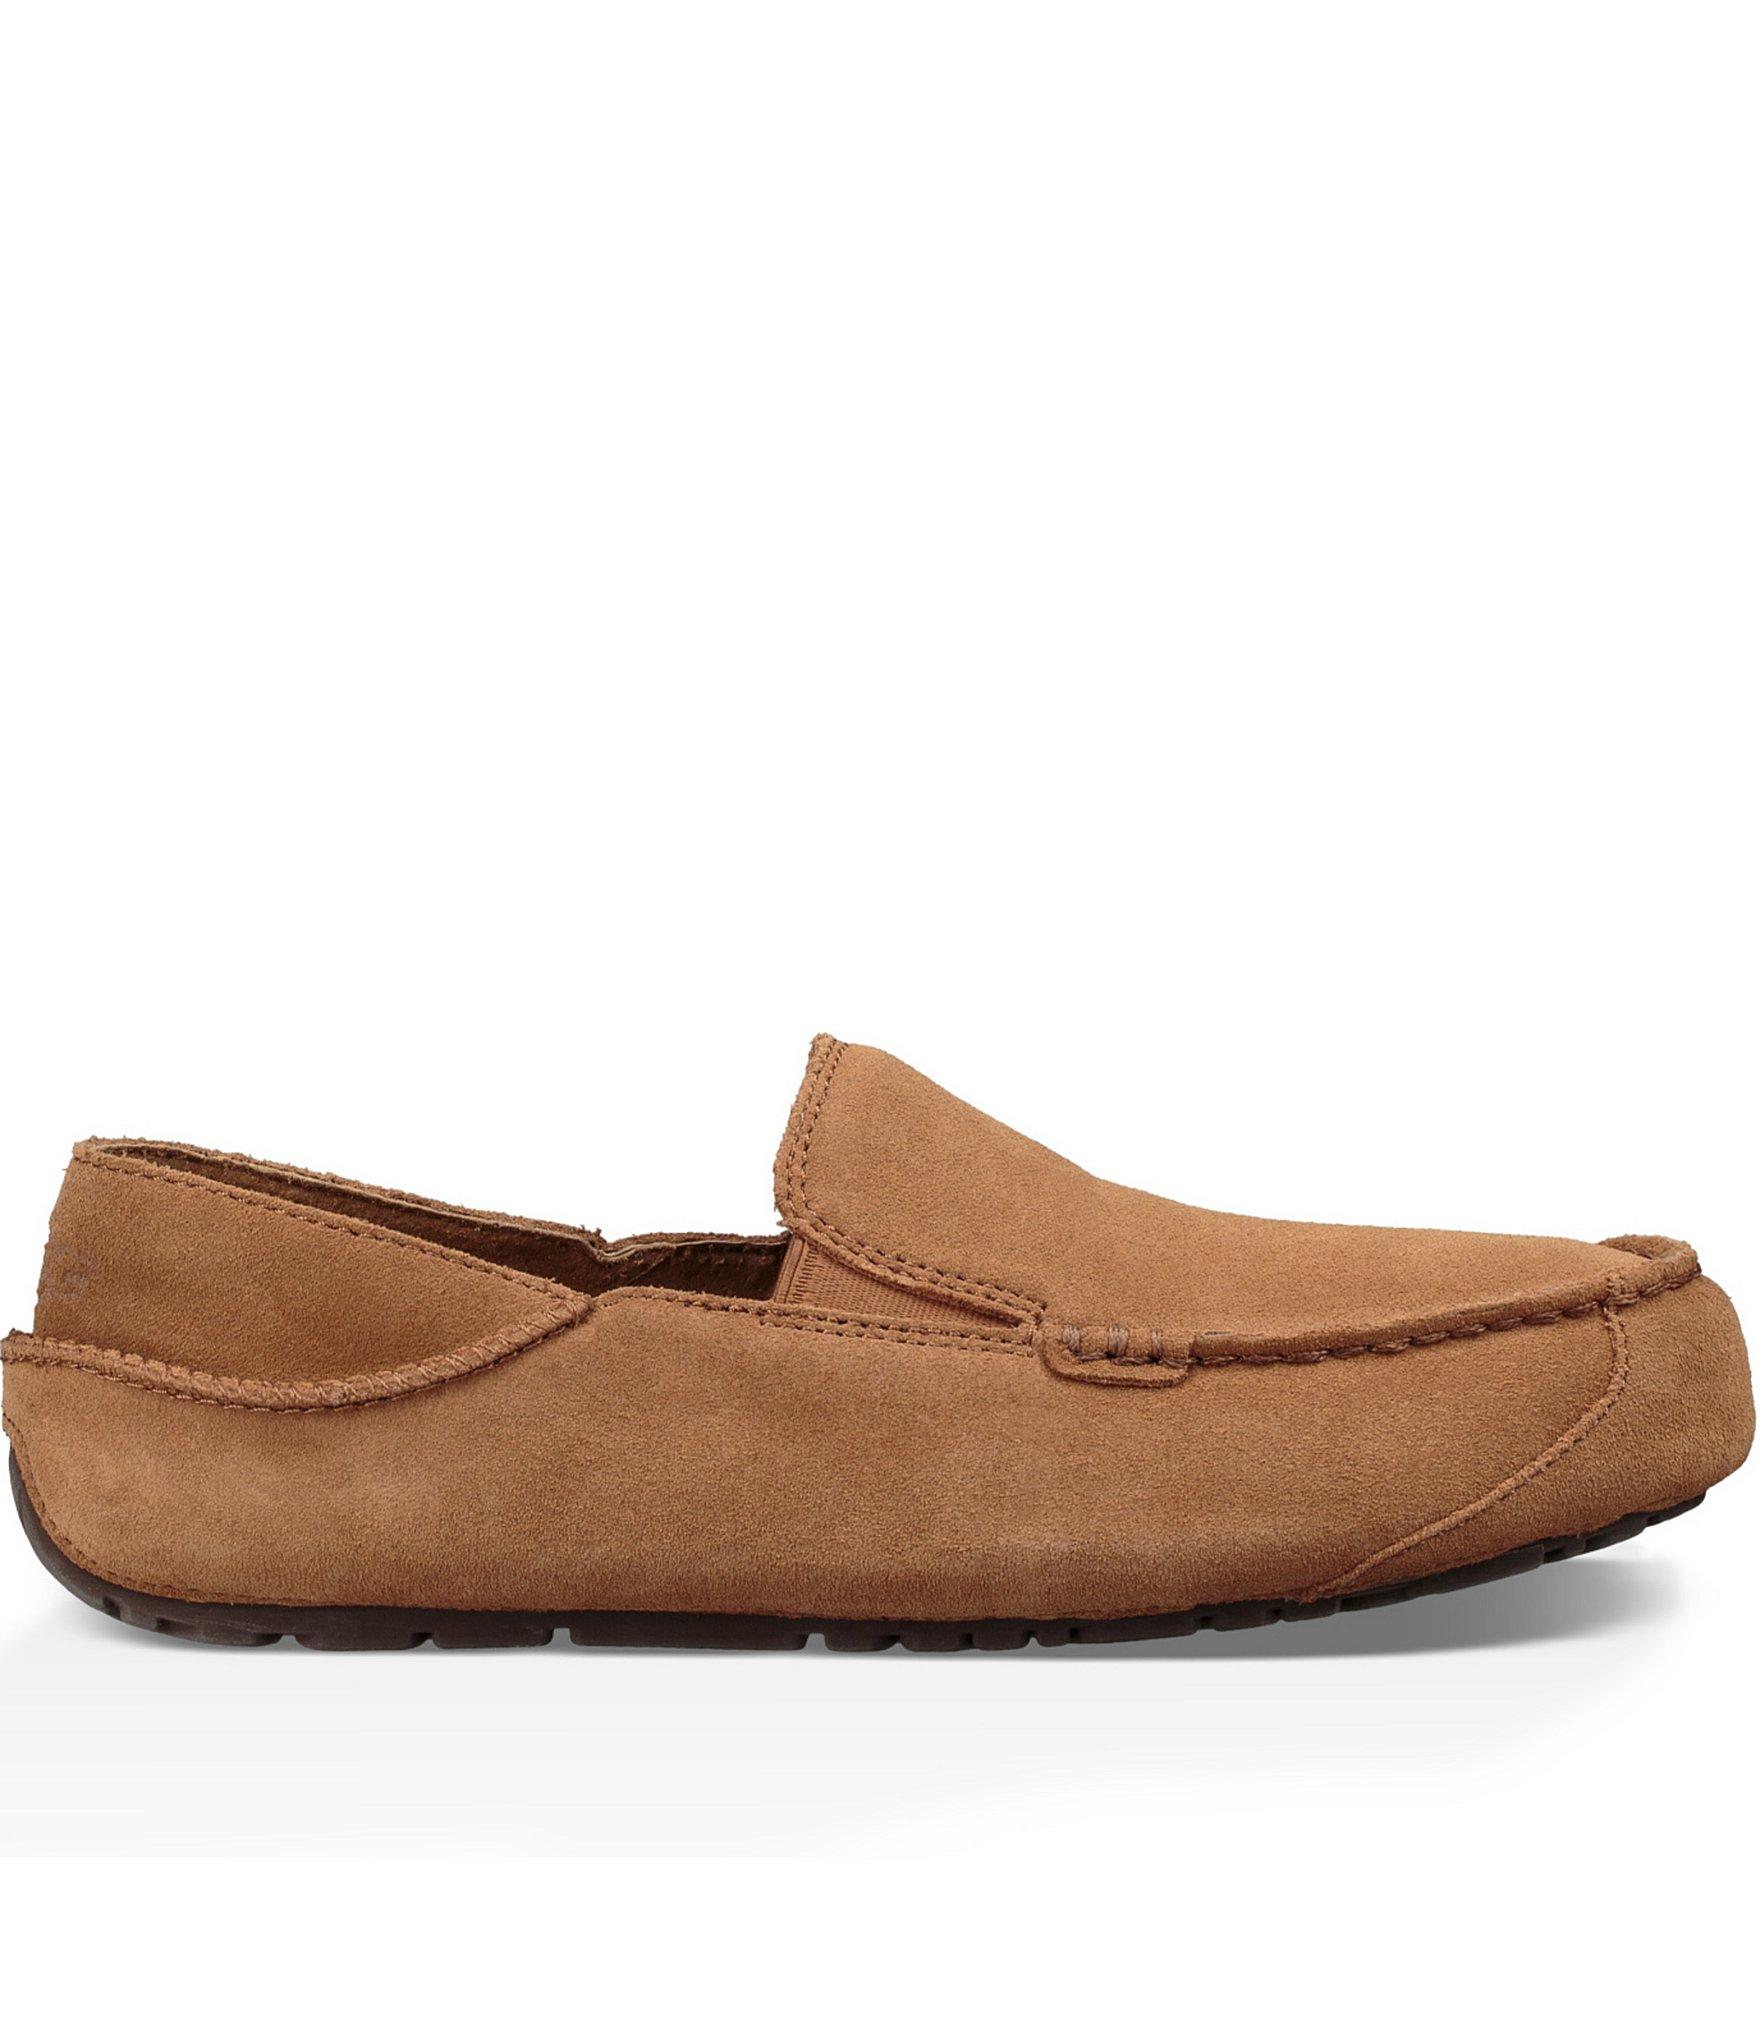 Lyst - Ugg ® Men's Upshaw Loafers in Brown for Men